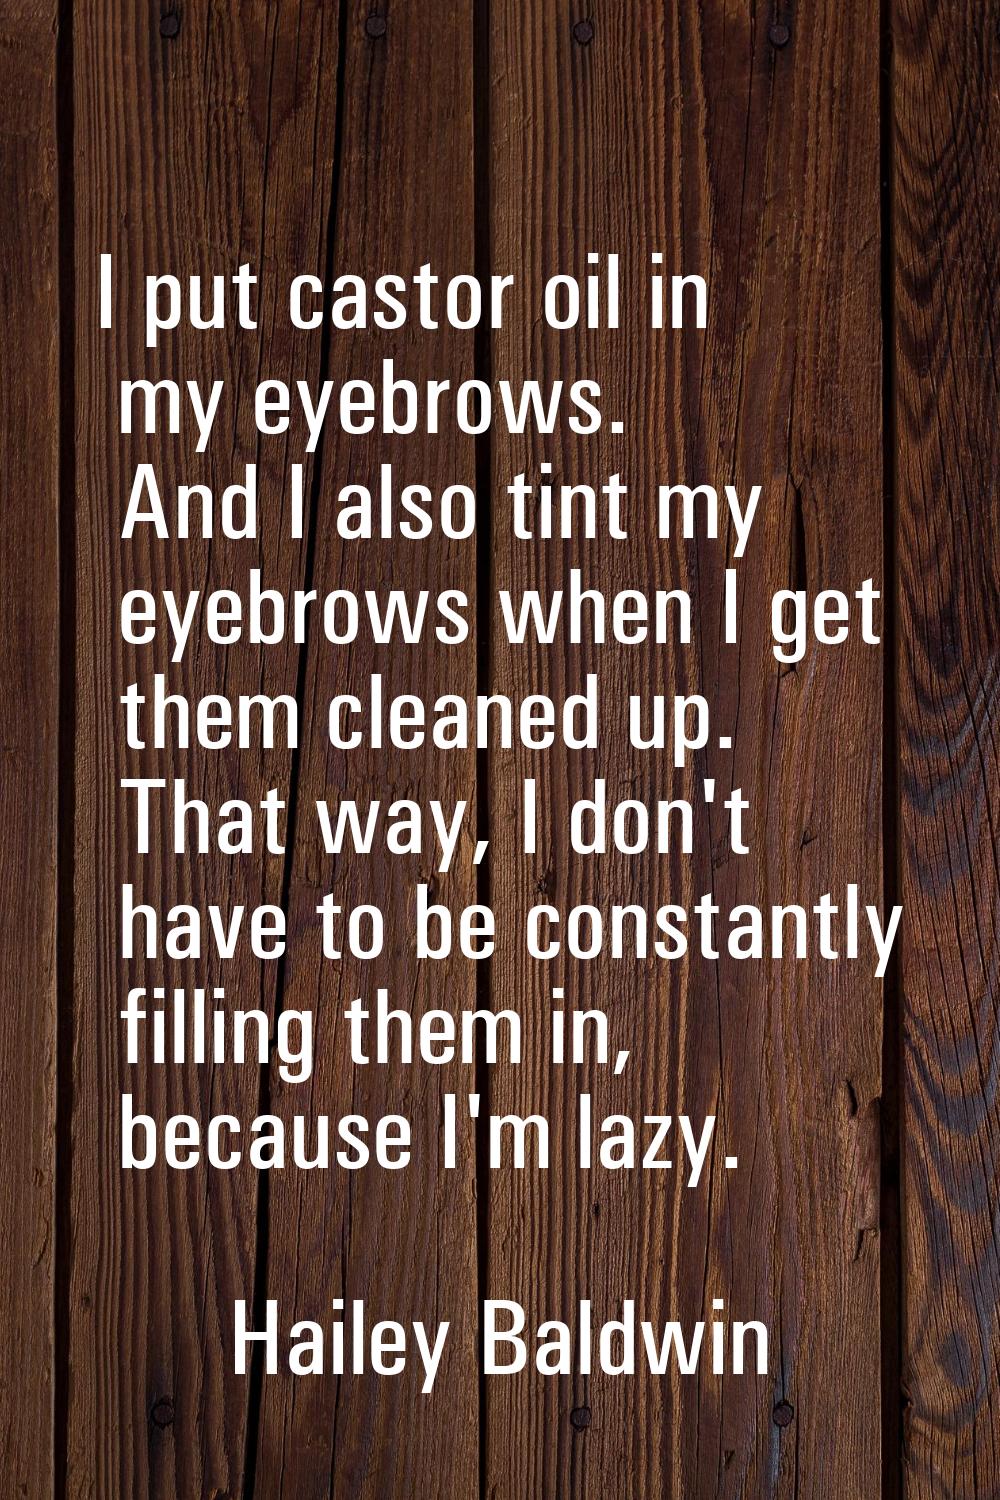 I put castor oil in my eyebrows. And I also tint my eyebrows when I get them cleaned up. That way, 